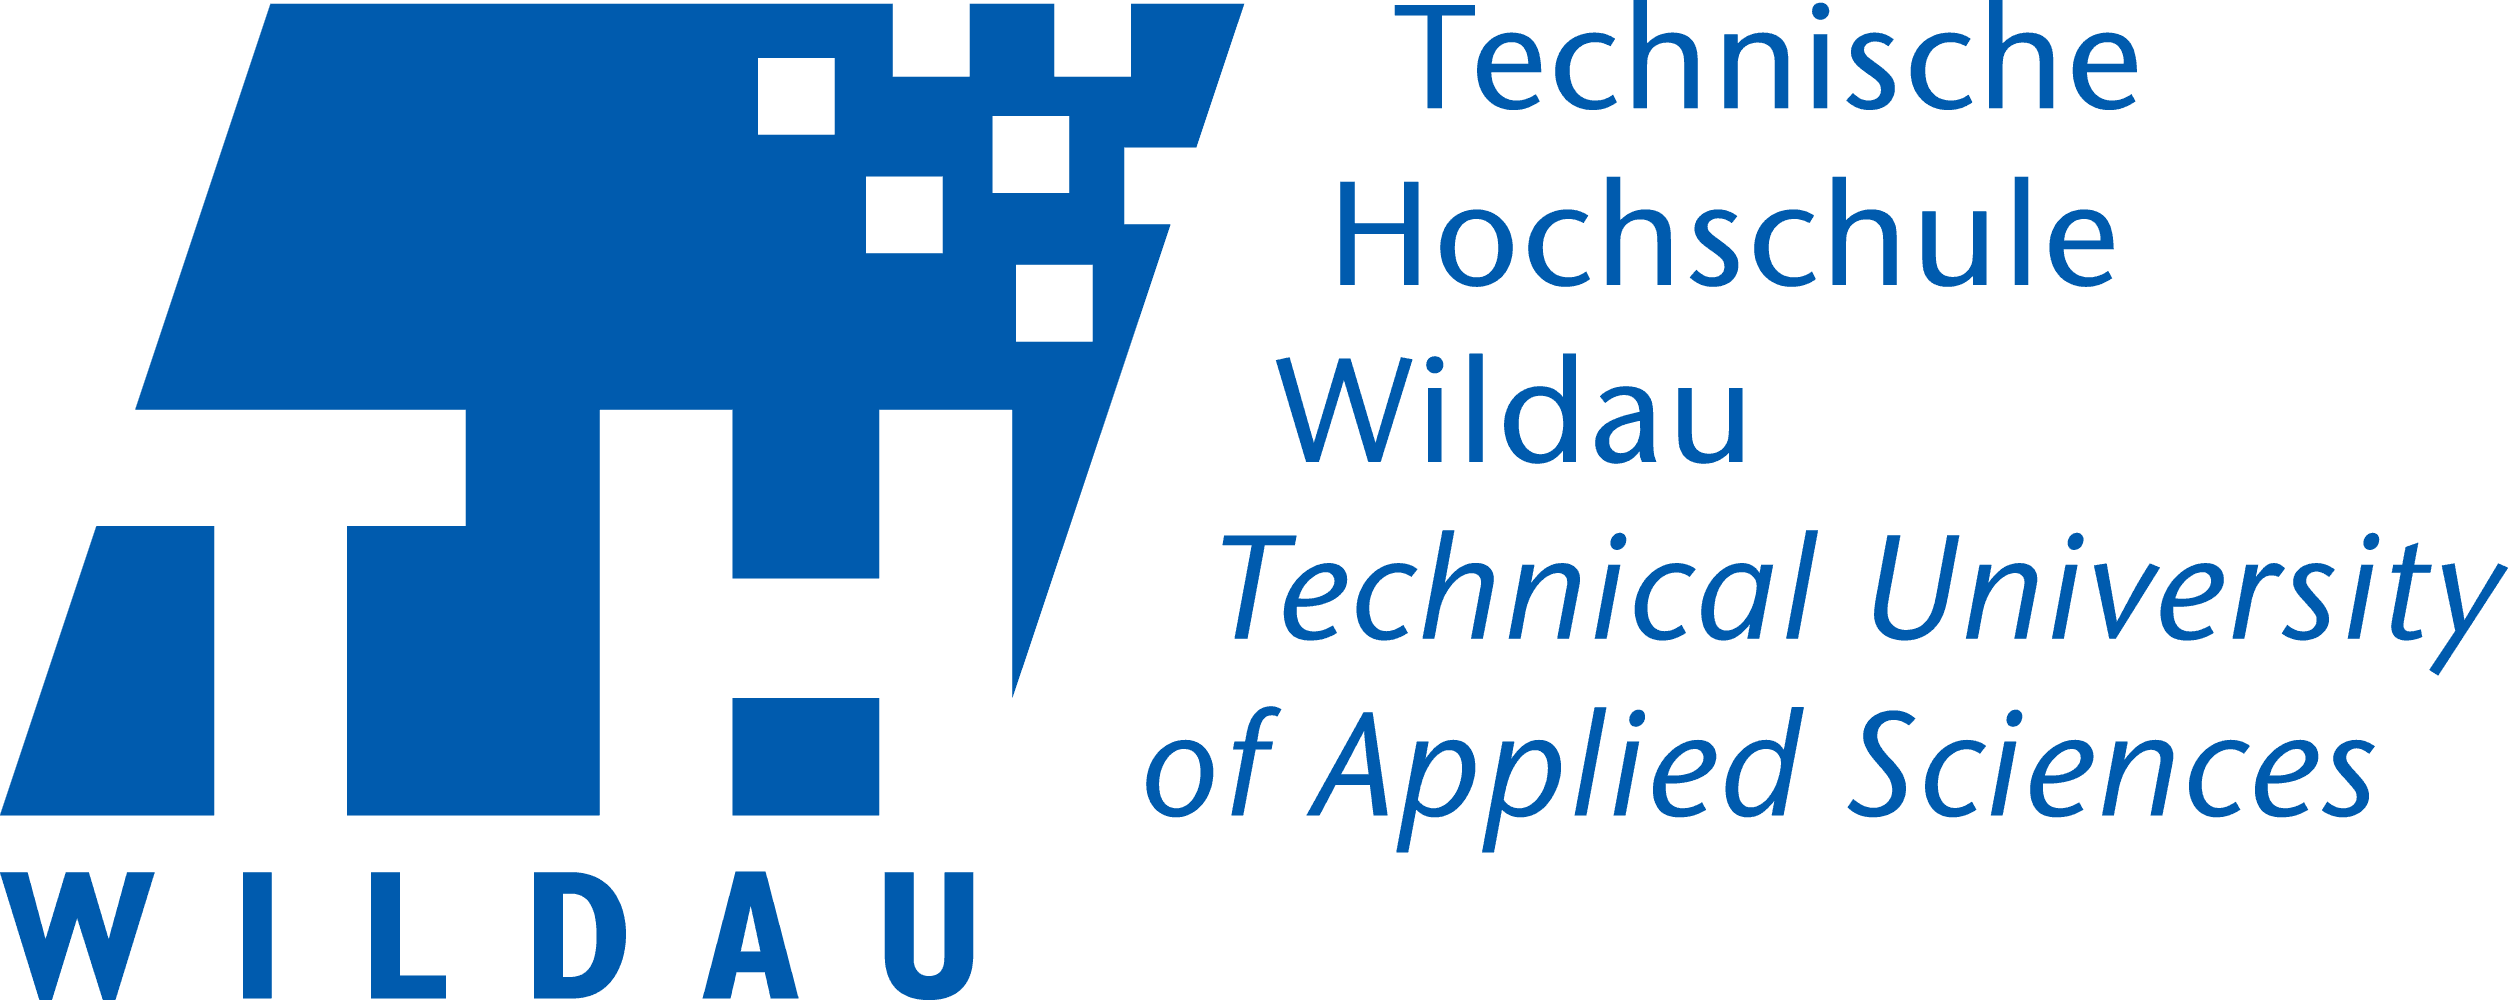 technical-university-of-applied-sciences-wildau-f4a0b21ec7-cover-picture